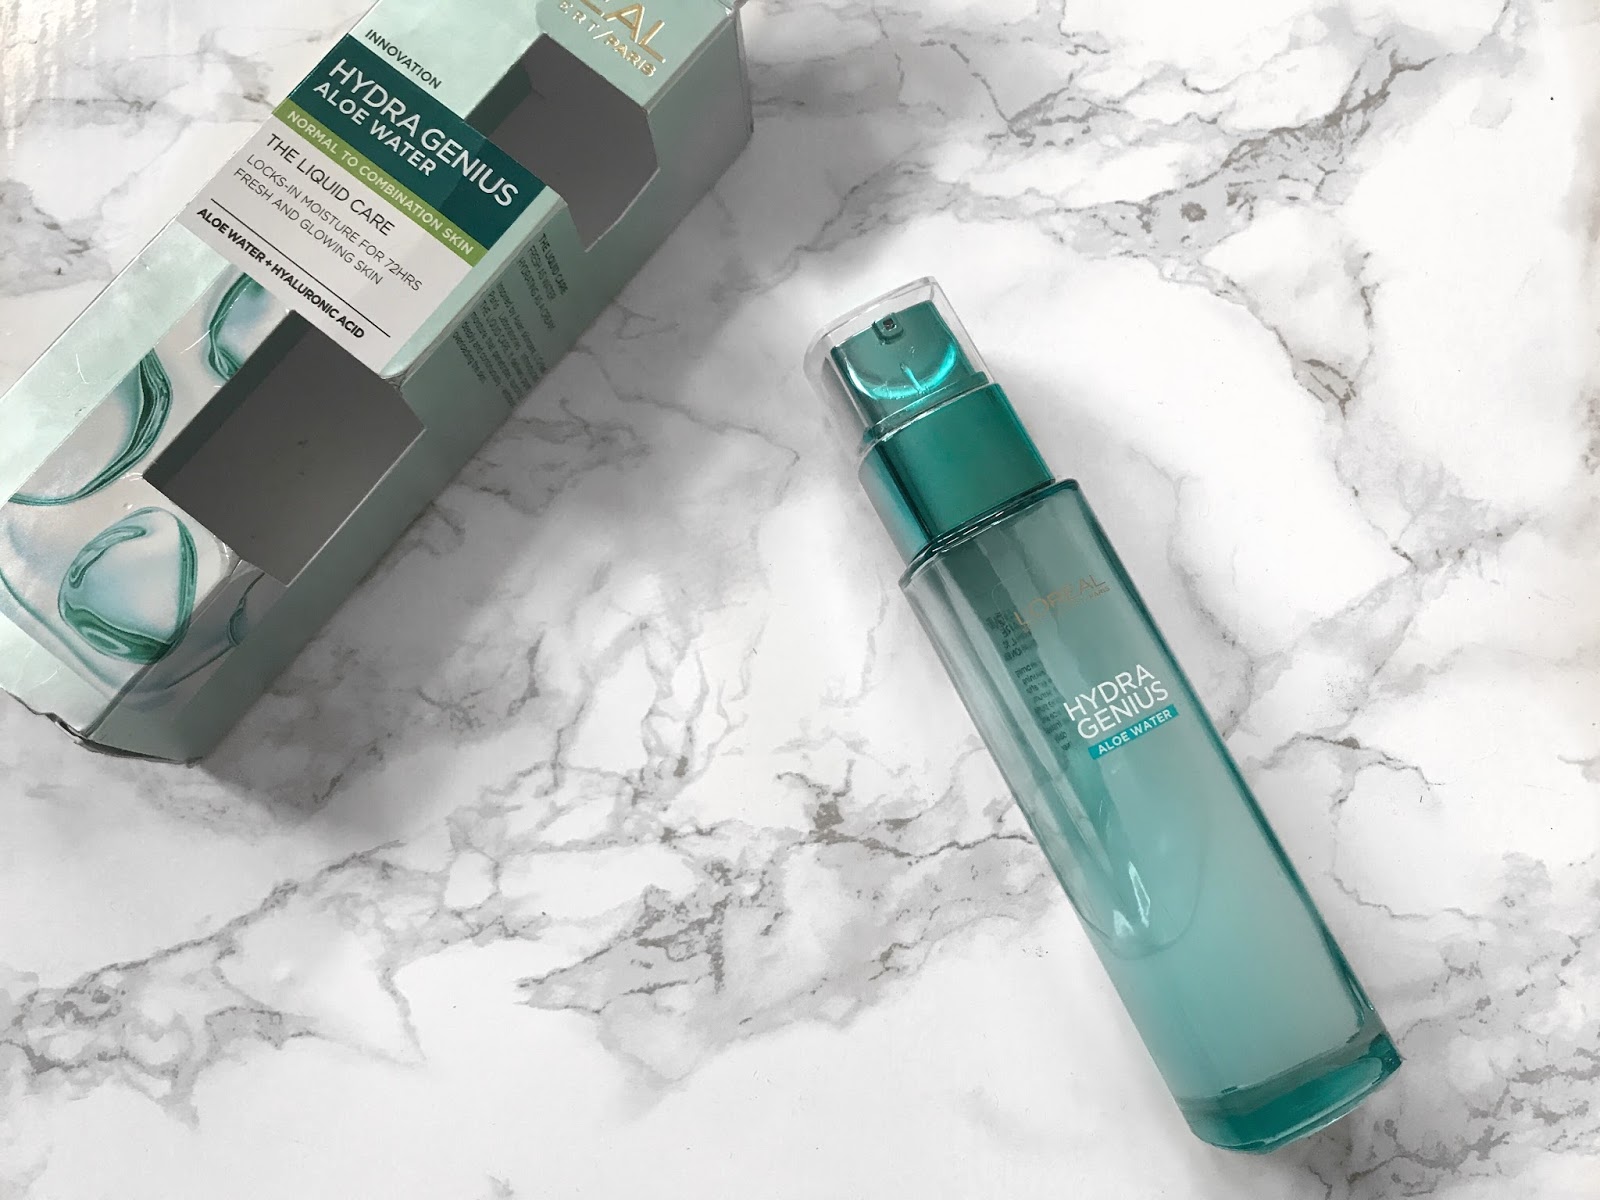 l'oreal hydra genius aloe water | review - Courtney - Leigh Blogs